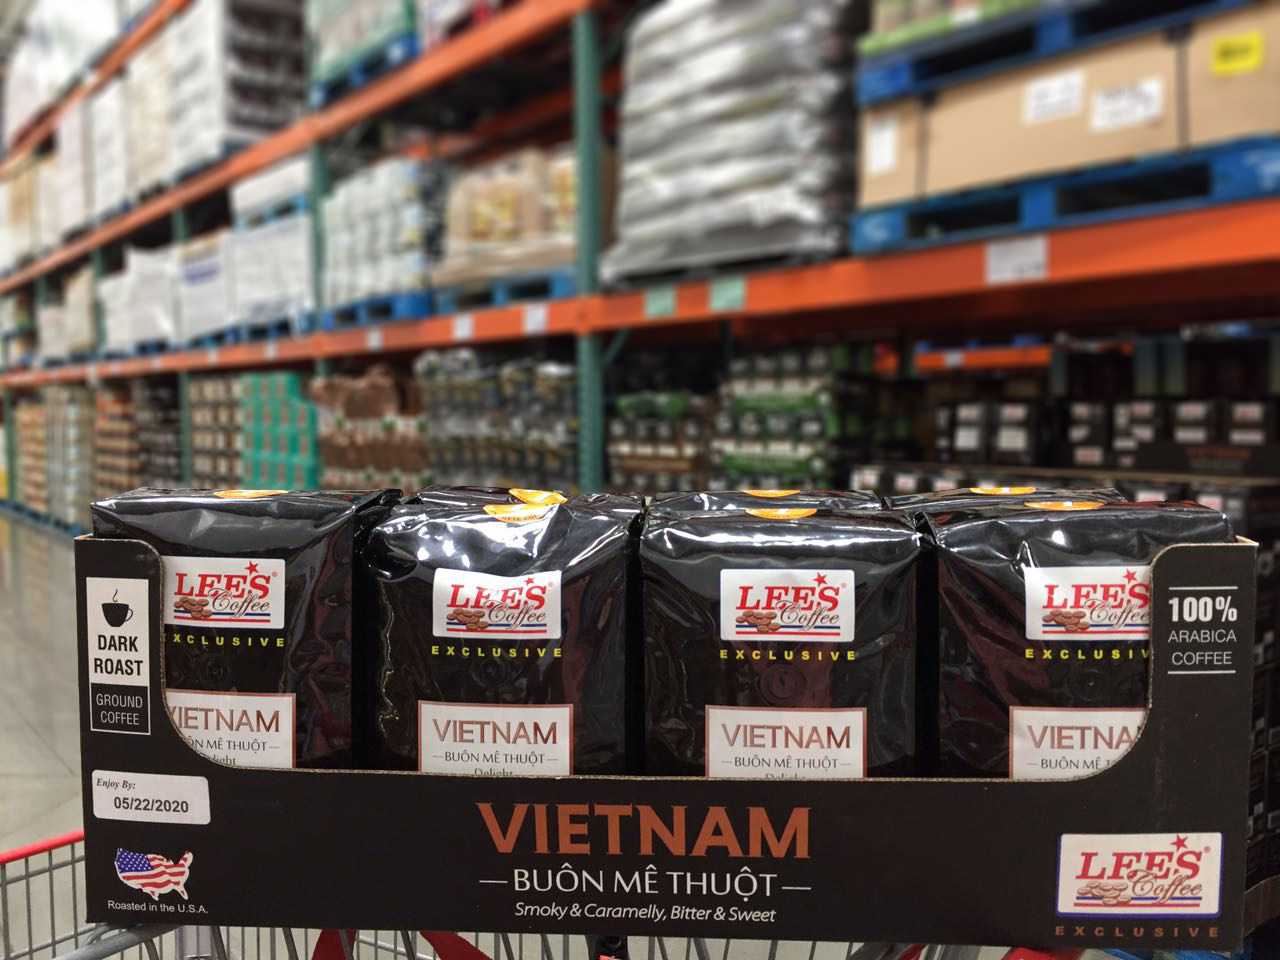 Lee's Sandwiches expands coffee products at select Costco ...